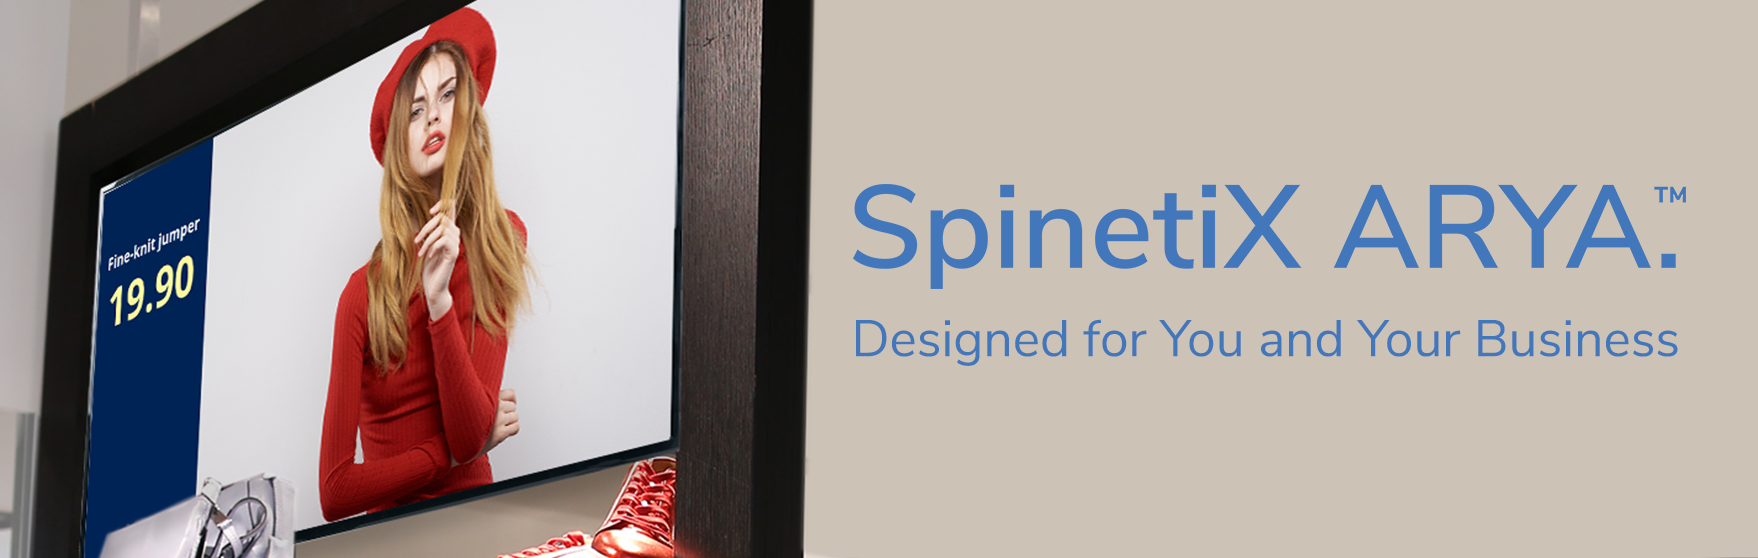 spinetix arya designed for you and your business